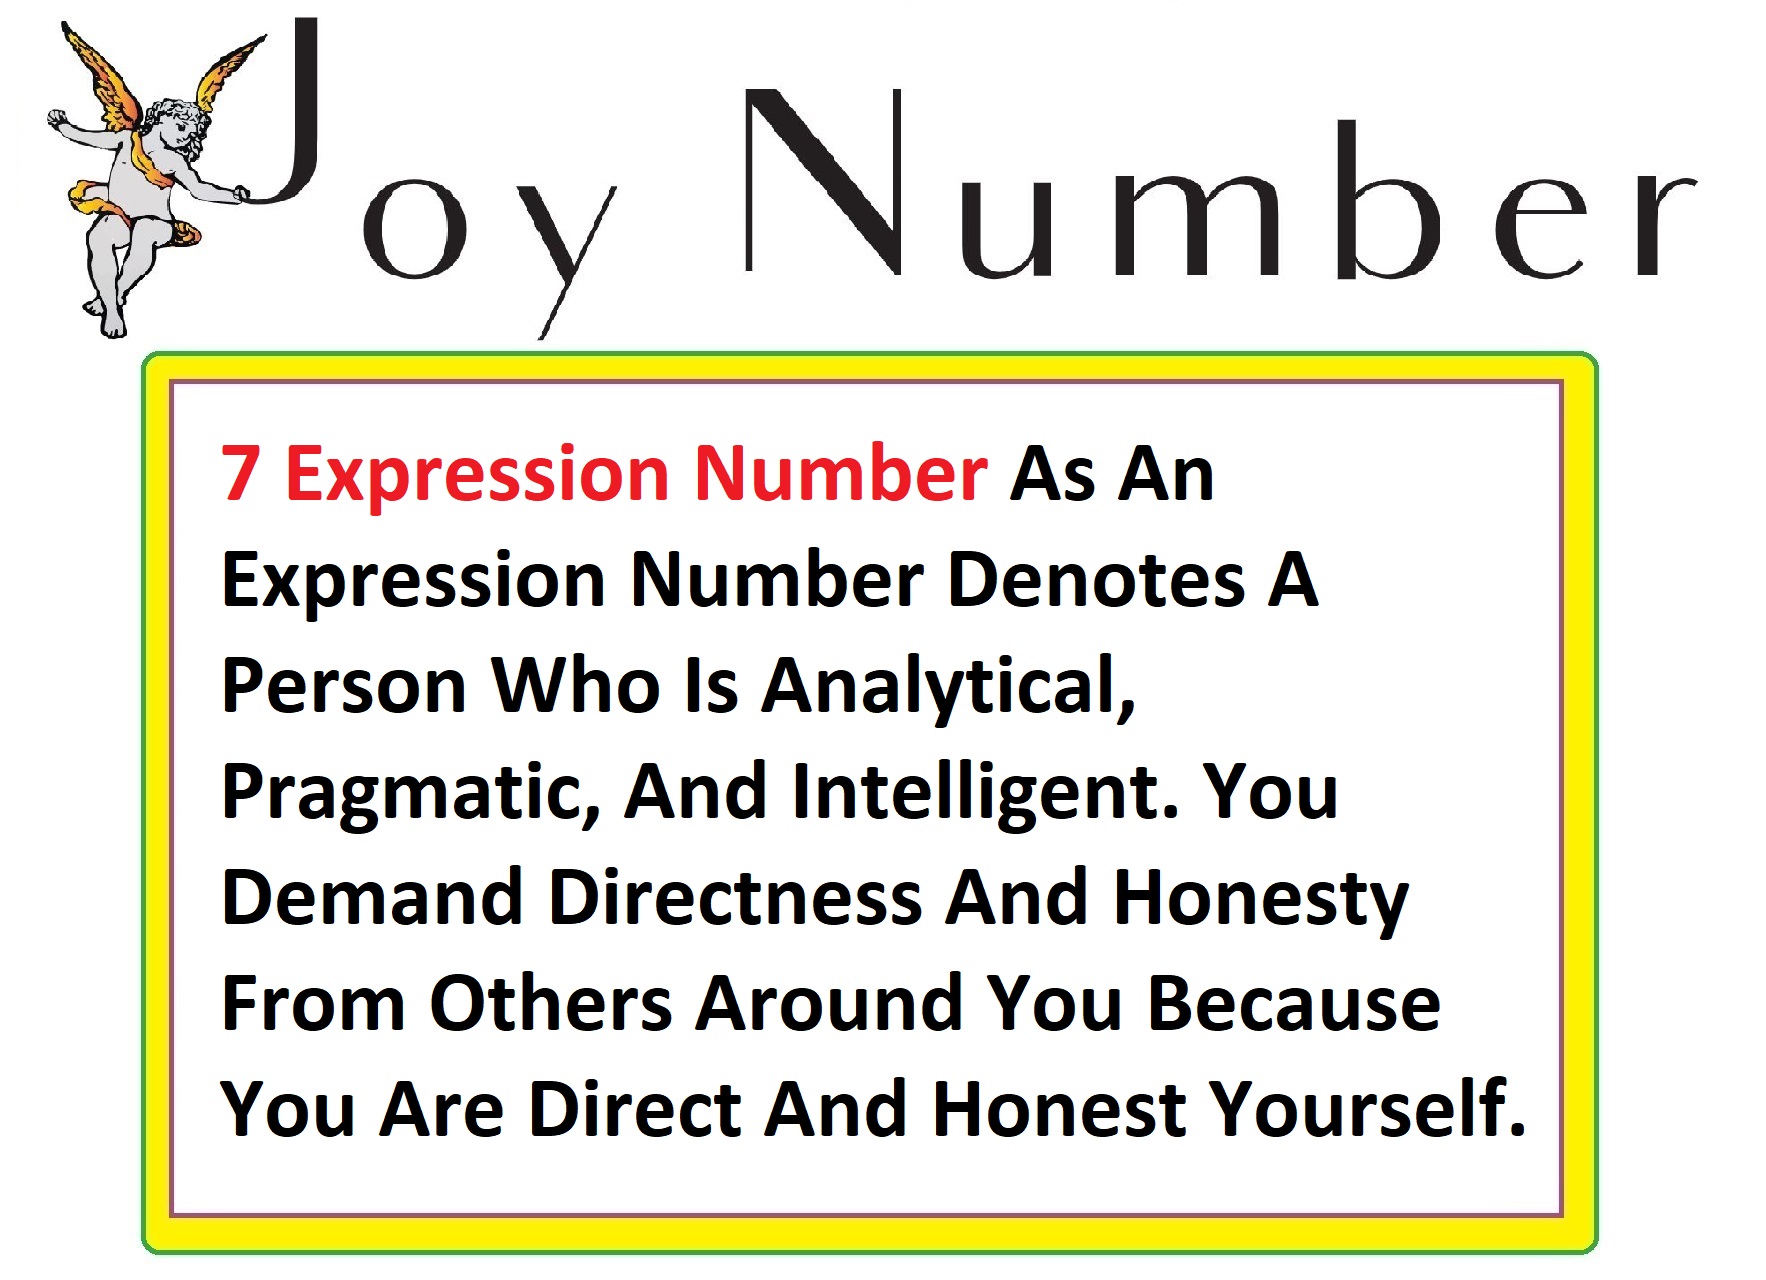 7 Expression Number - Involves A Search For Deeper Truths